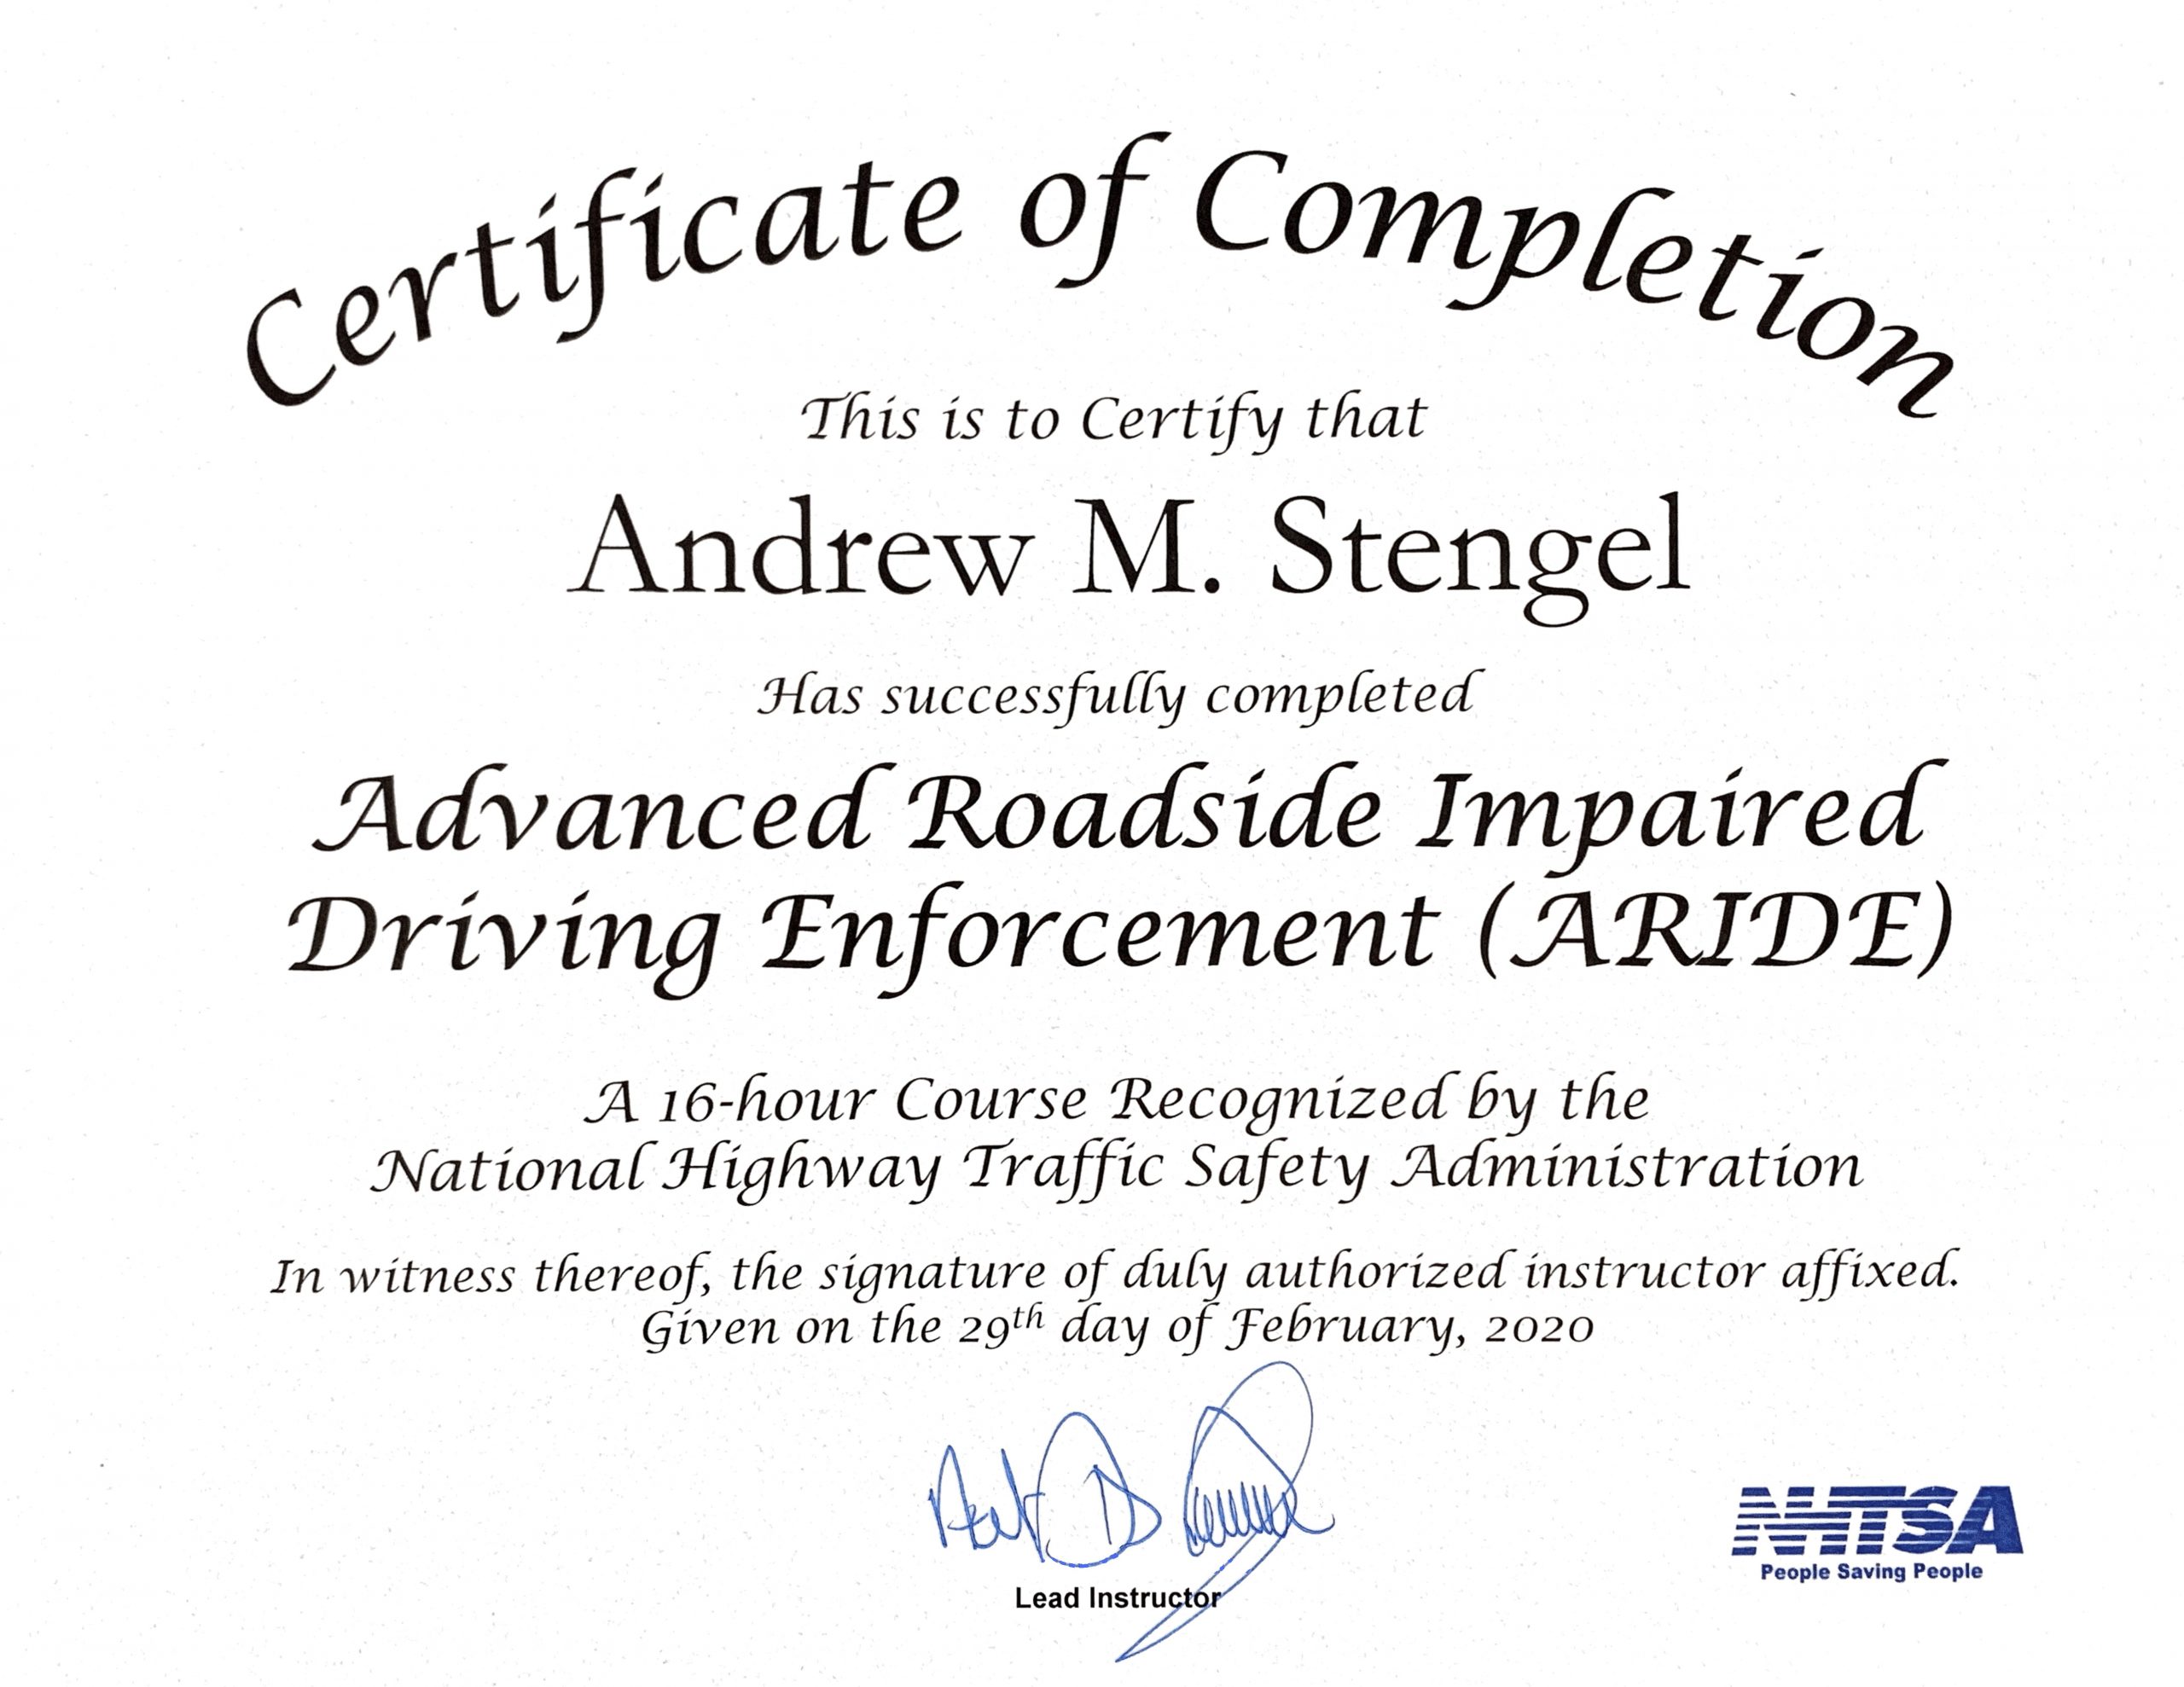 NYC DWI and DWI Drugs Advanced Roadside Impaired Enforcement (ARIDE) Certificate